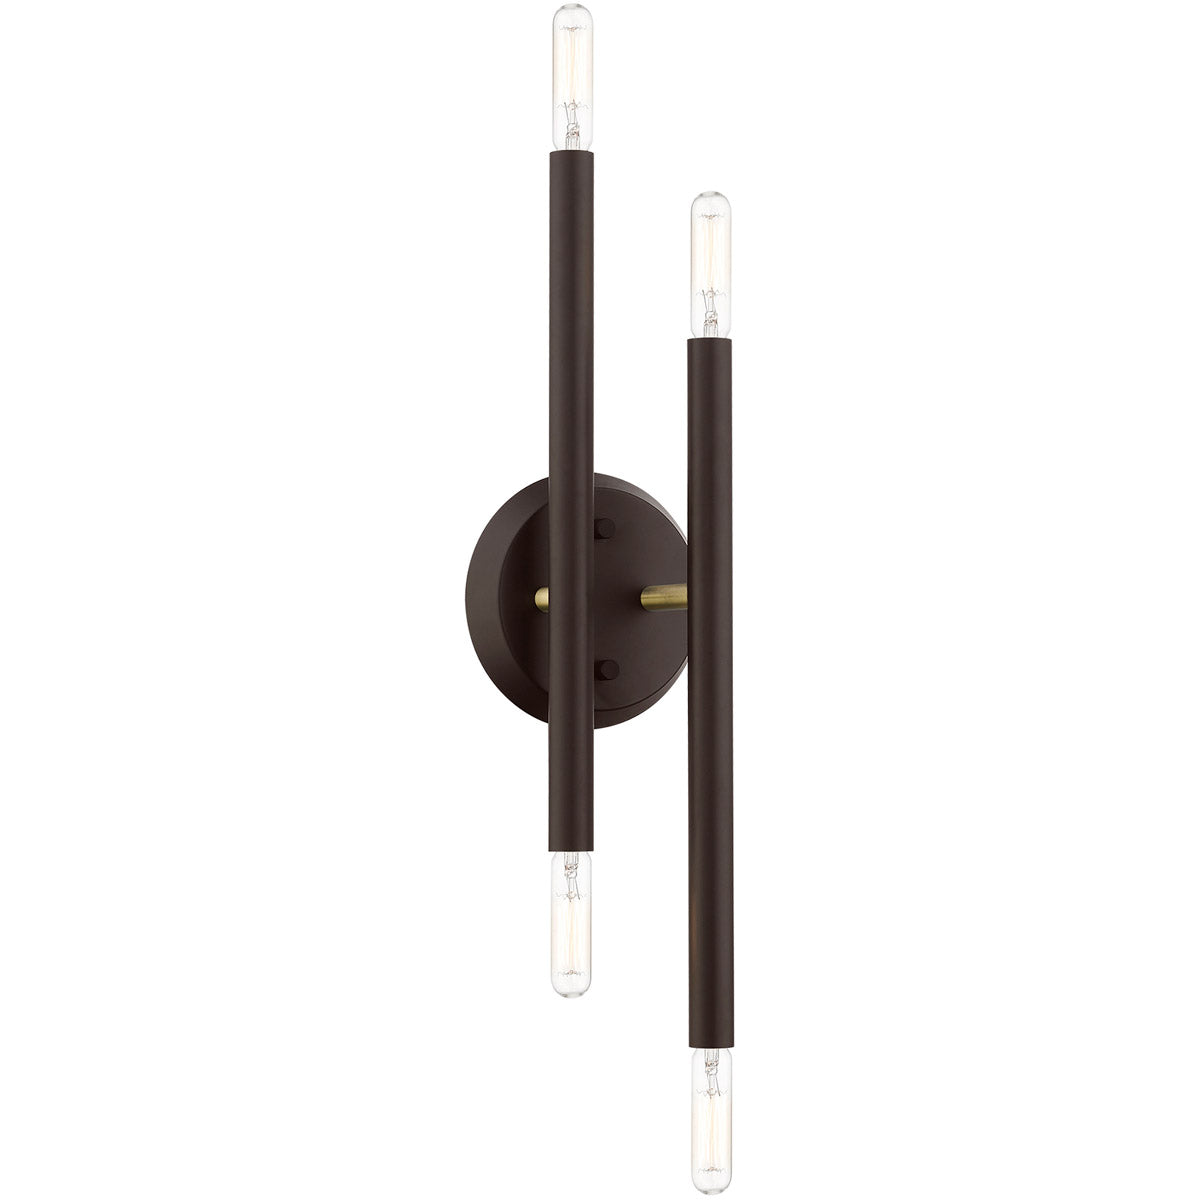 Soho 4 Light ADA Sconce Wall Light-Livex Lighting-LIVEX-46771-07-Wall LightingBronze with Antique Brass Accents-1-France and Son